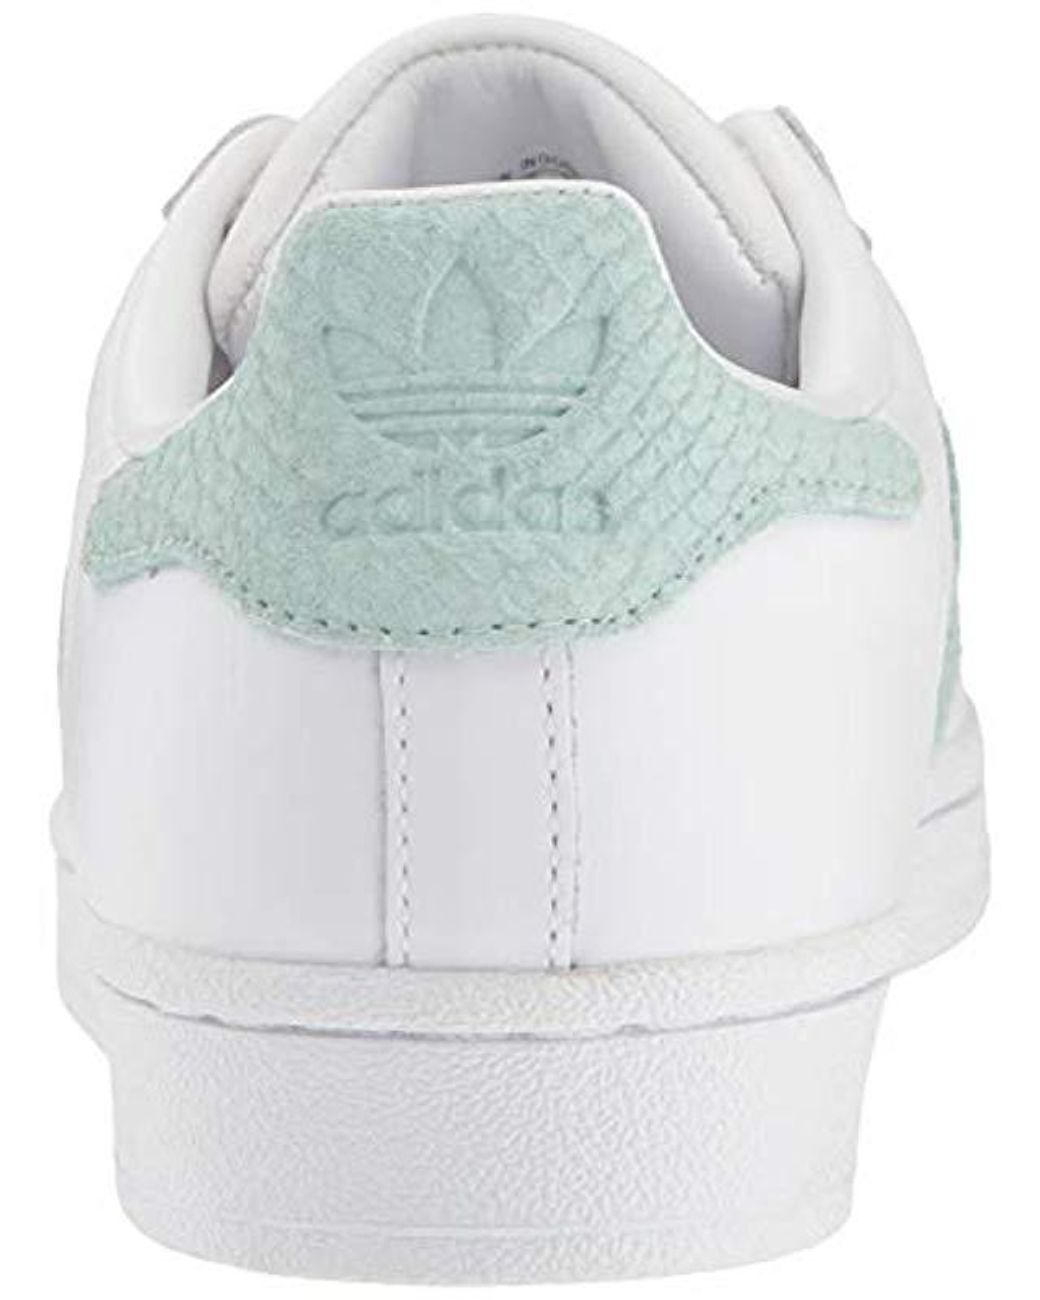 adidas Originals Leather Superstar Shoes Sneaker, White/ash Green/silver  Metallic, 5.5 M Us | Lyst